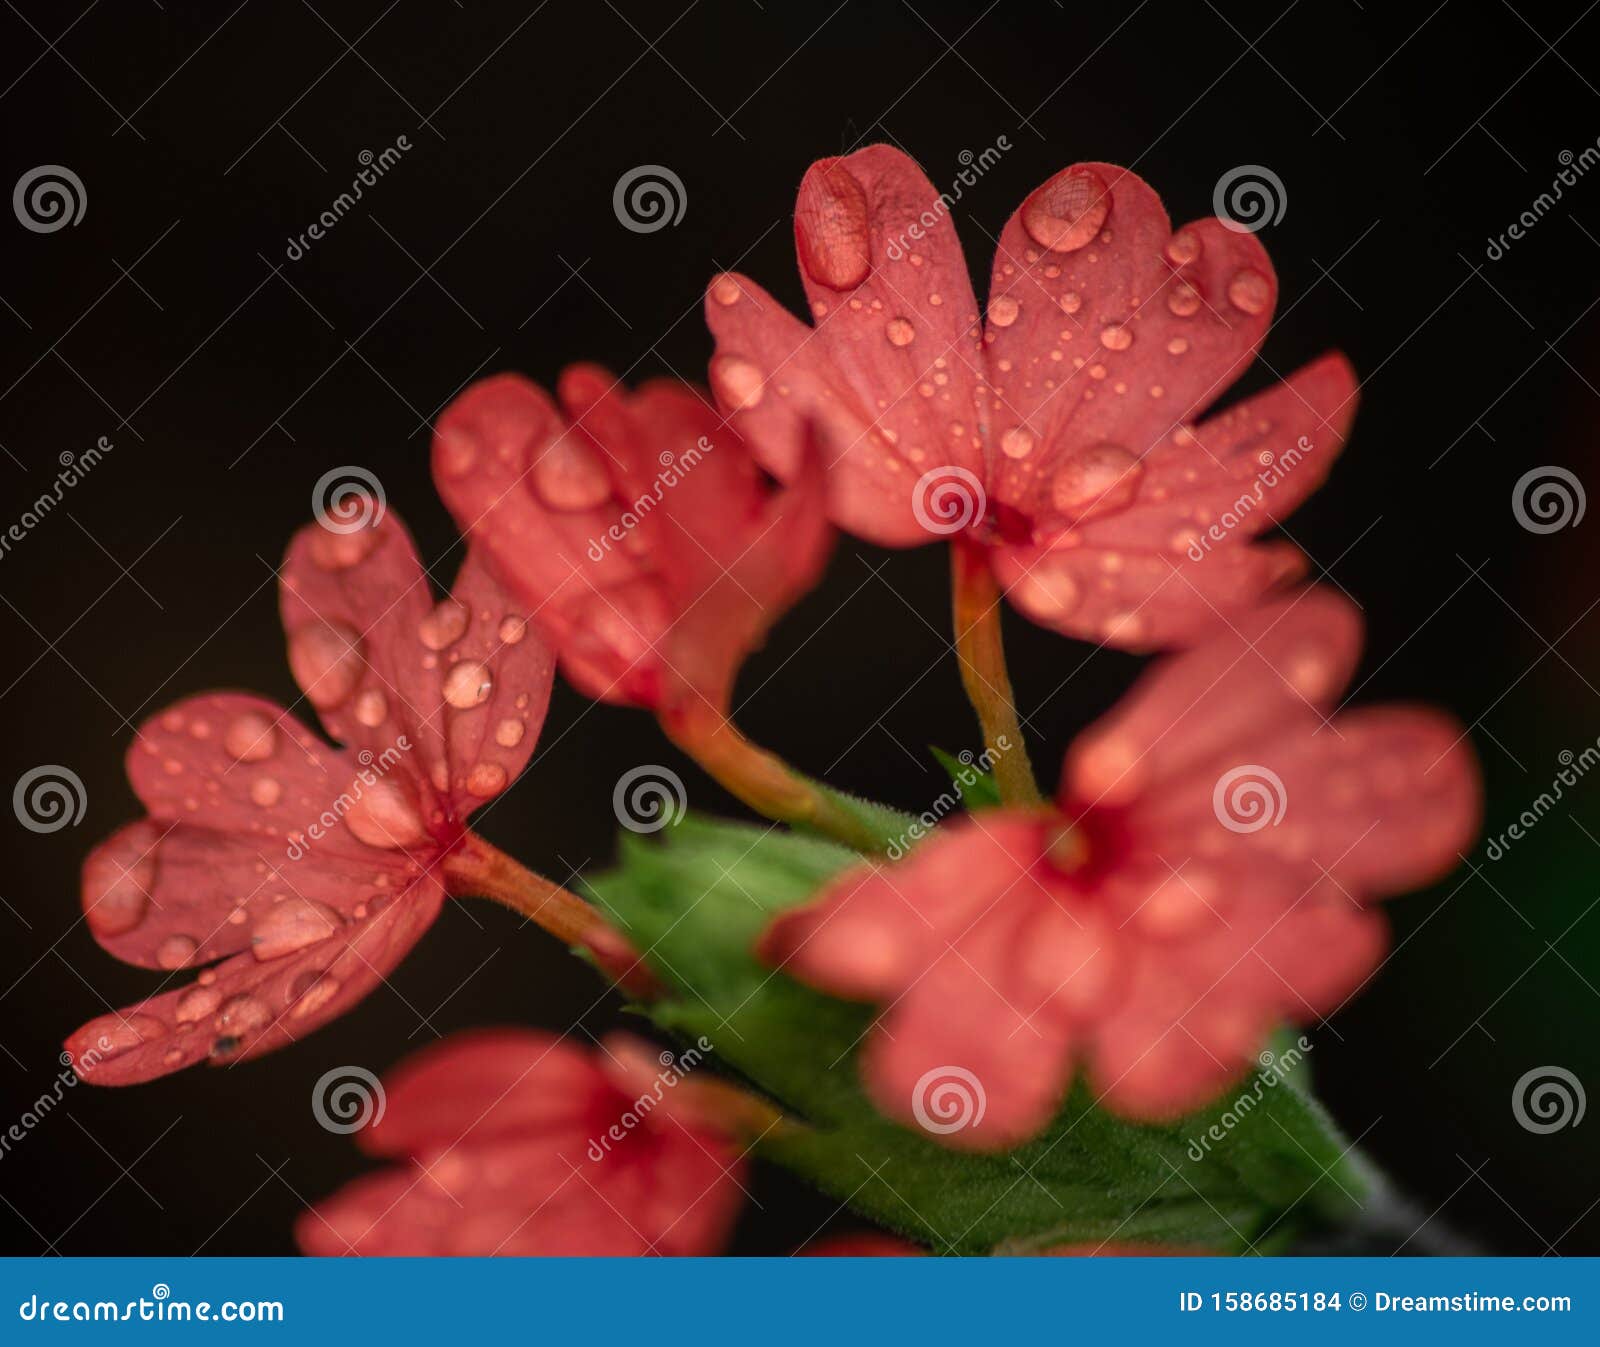 the rains washes the red onto the flowers.